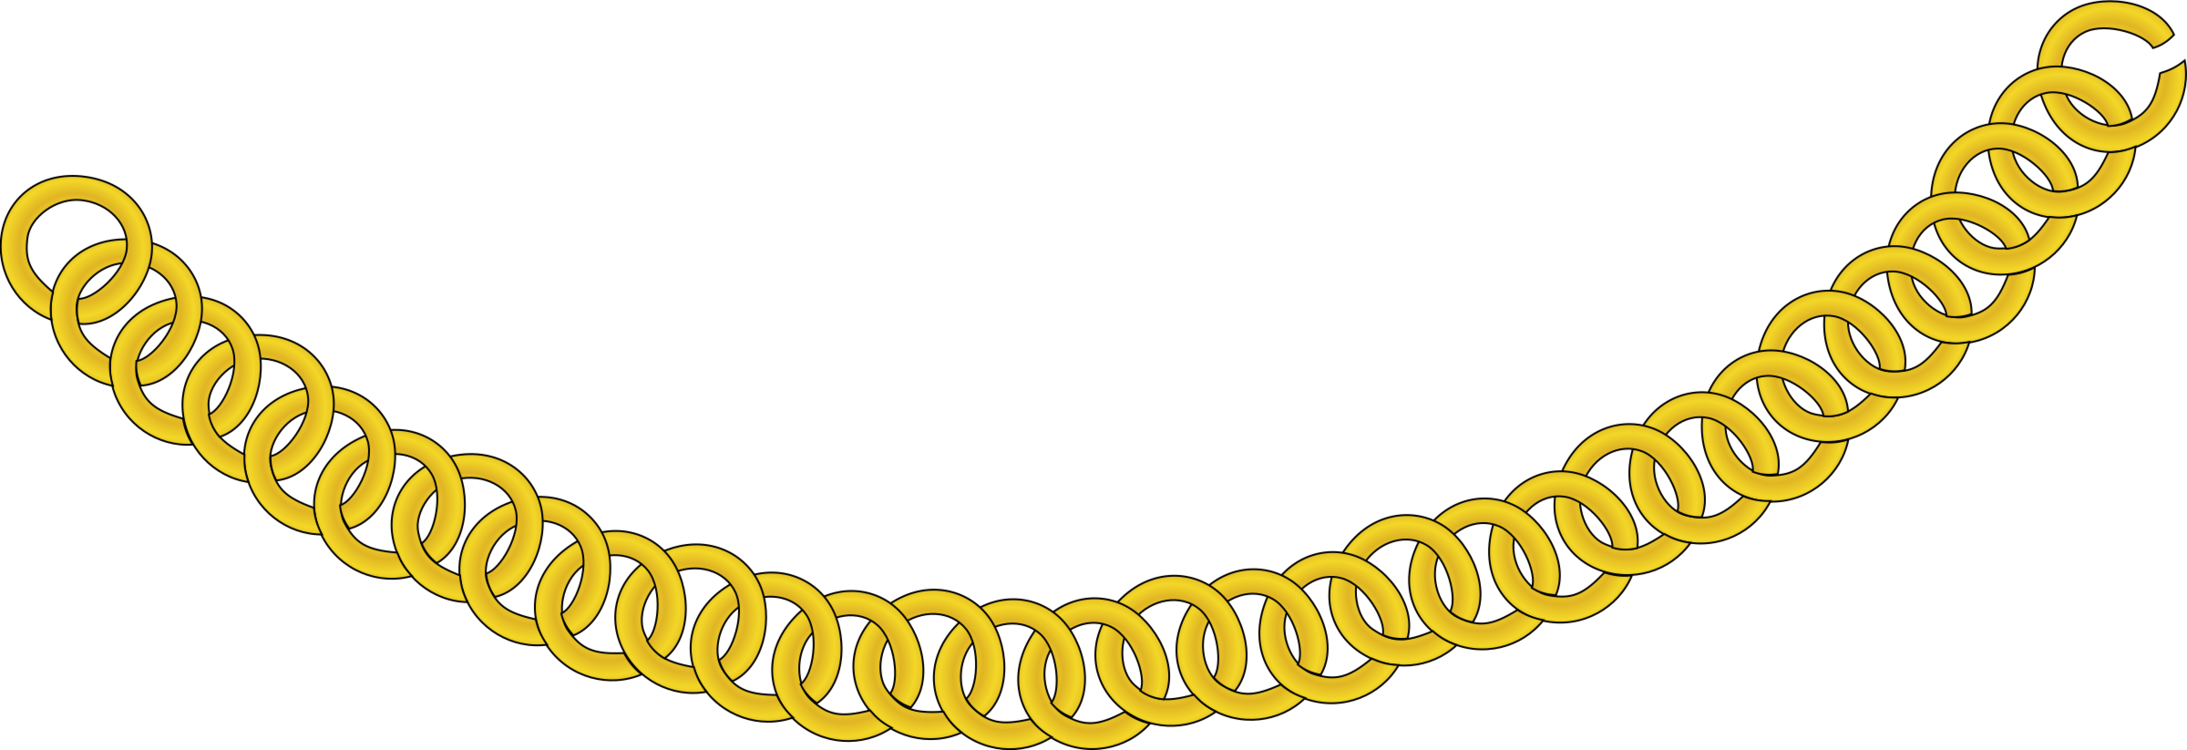 Gold Jewellery PNG HD Image